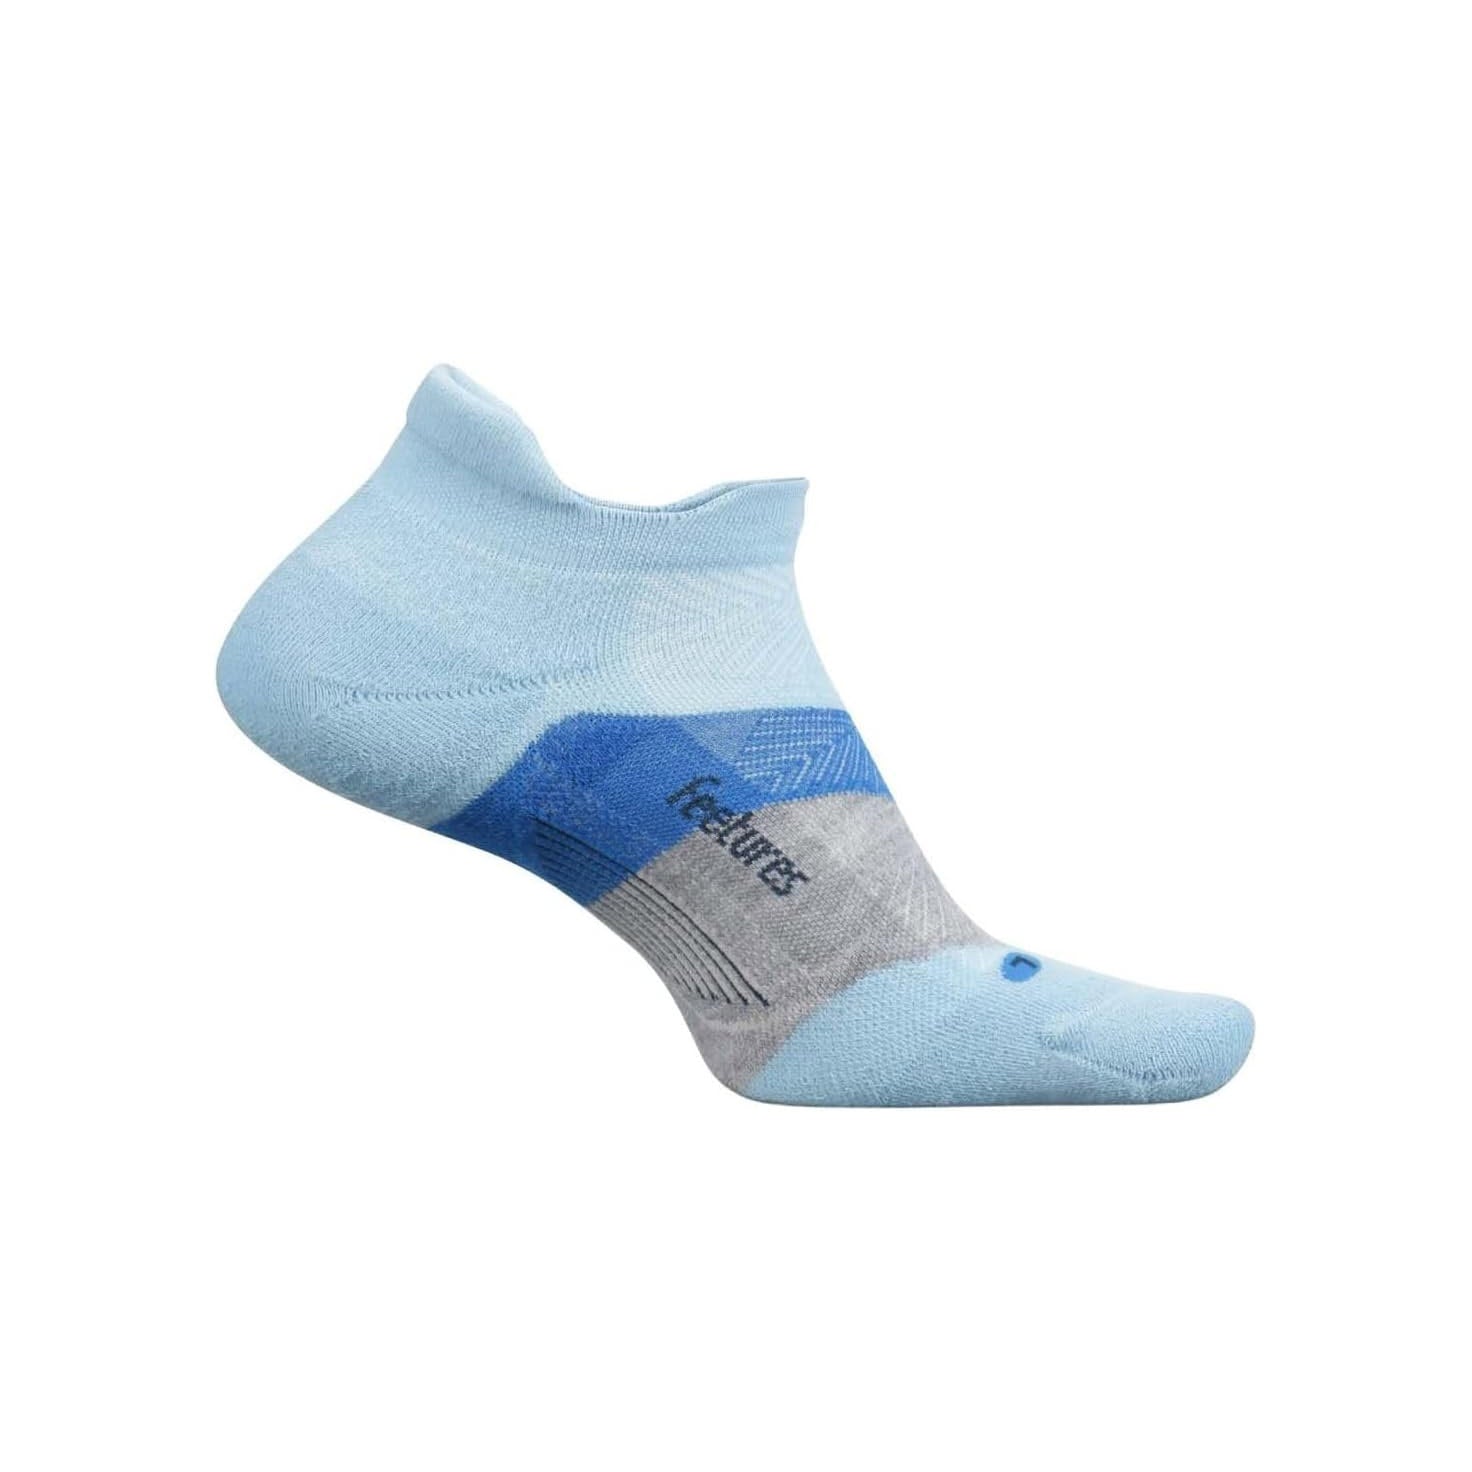 A single Feetures ELITE ULTRA LIGHT NO SHOW TAB BIG SKY BL ankle sock with a grey and blue design featuring the logo "features" printed across the foot, designed with targeted compression for a custom-like fit.